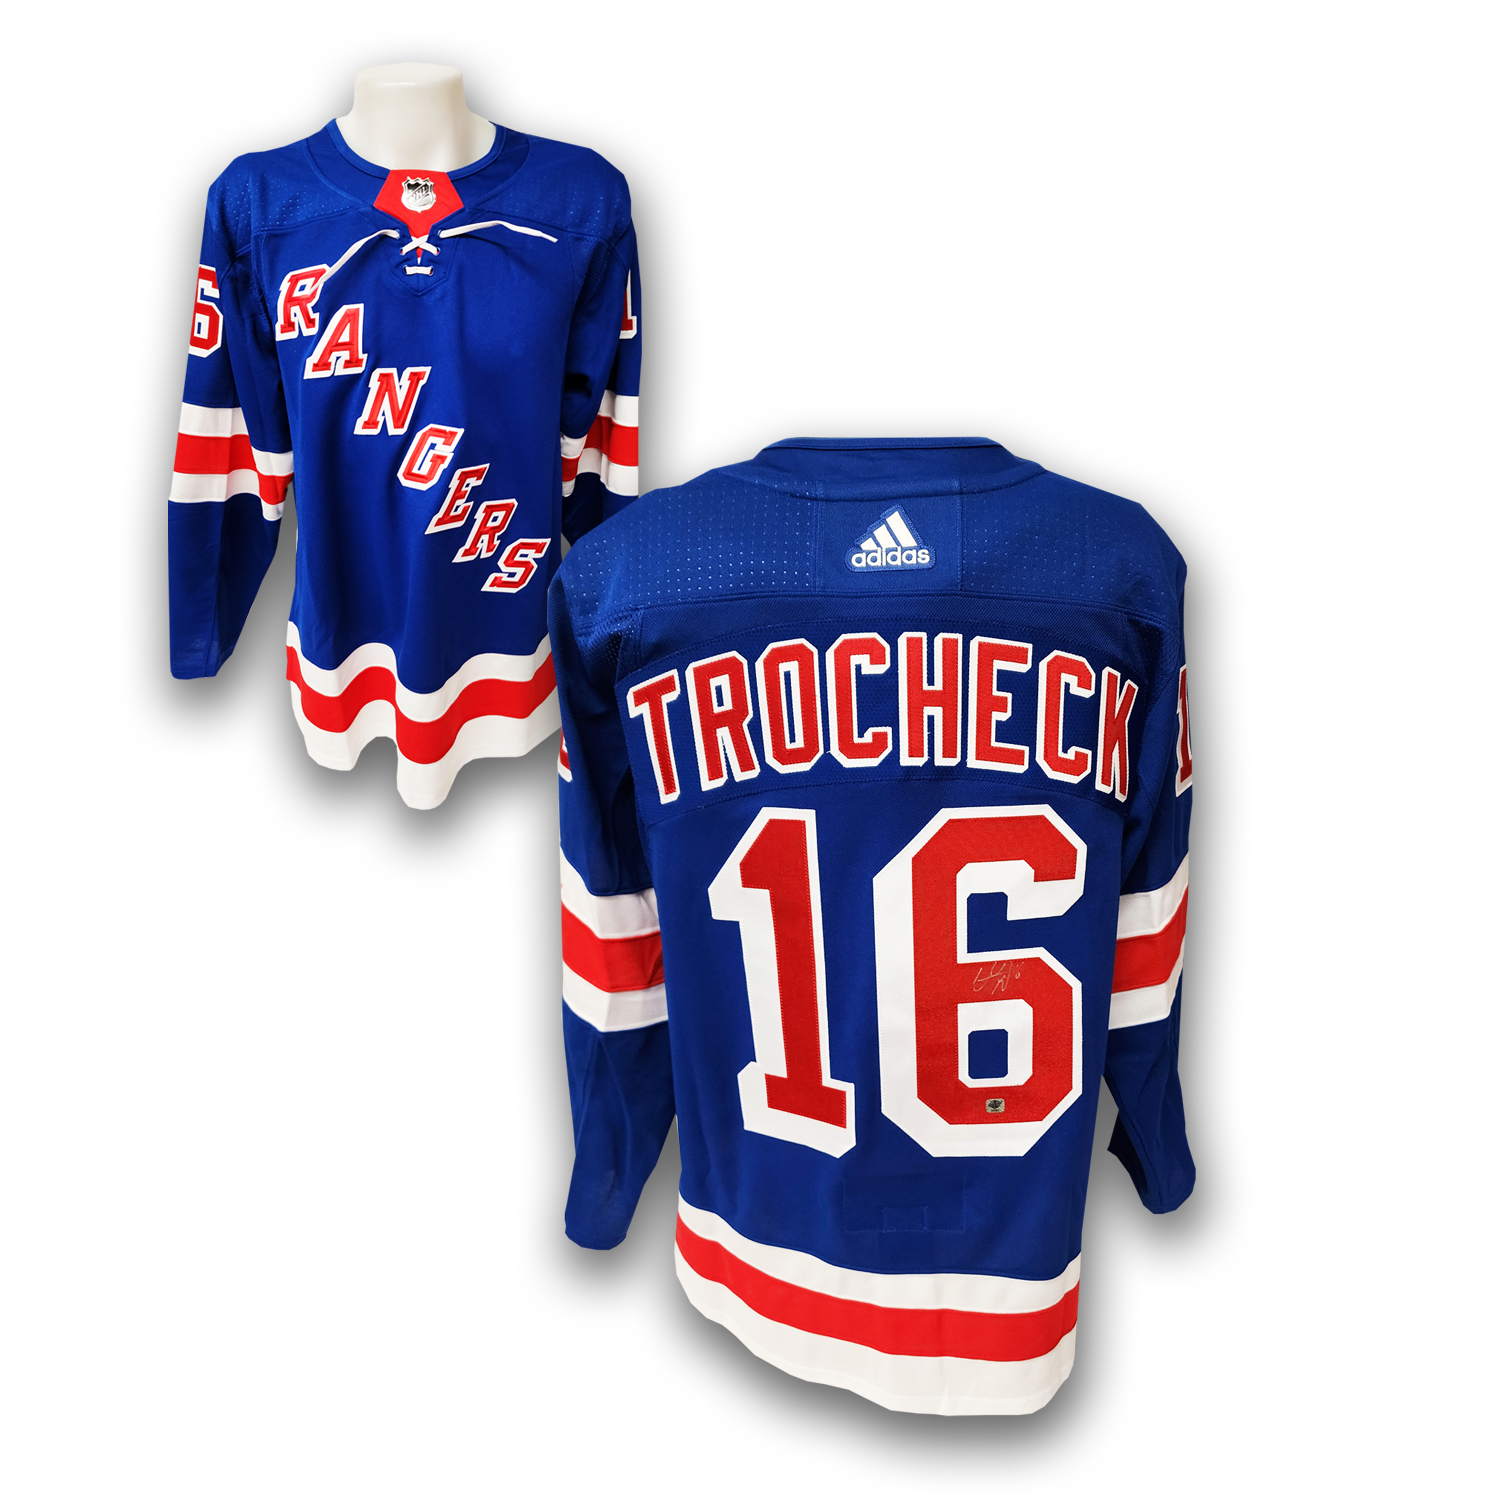 Vincent Trocheck New York Rangers Autographed Adidas Jersey